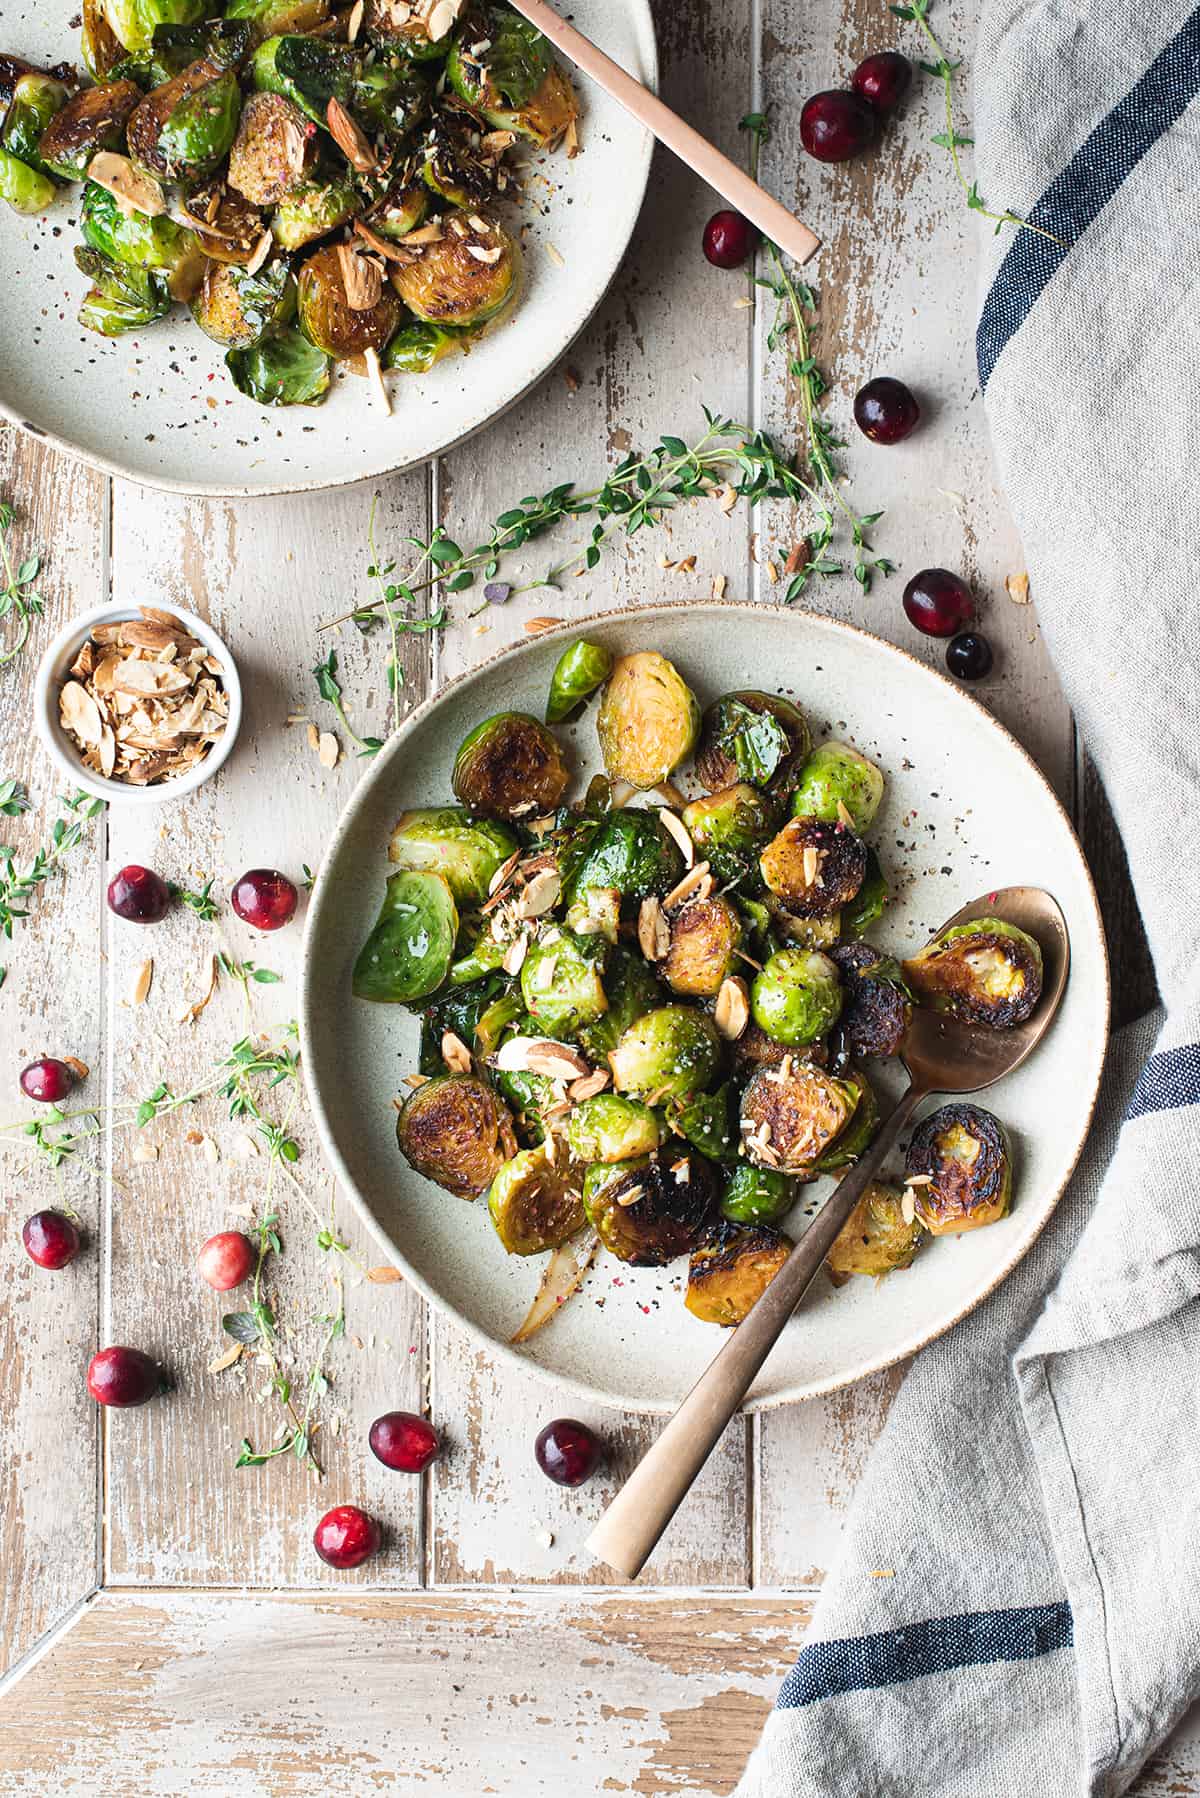 bowl of Roasted Brussels sprouts on wooden table with linen napkin + spoon